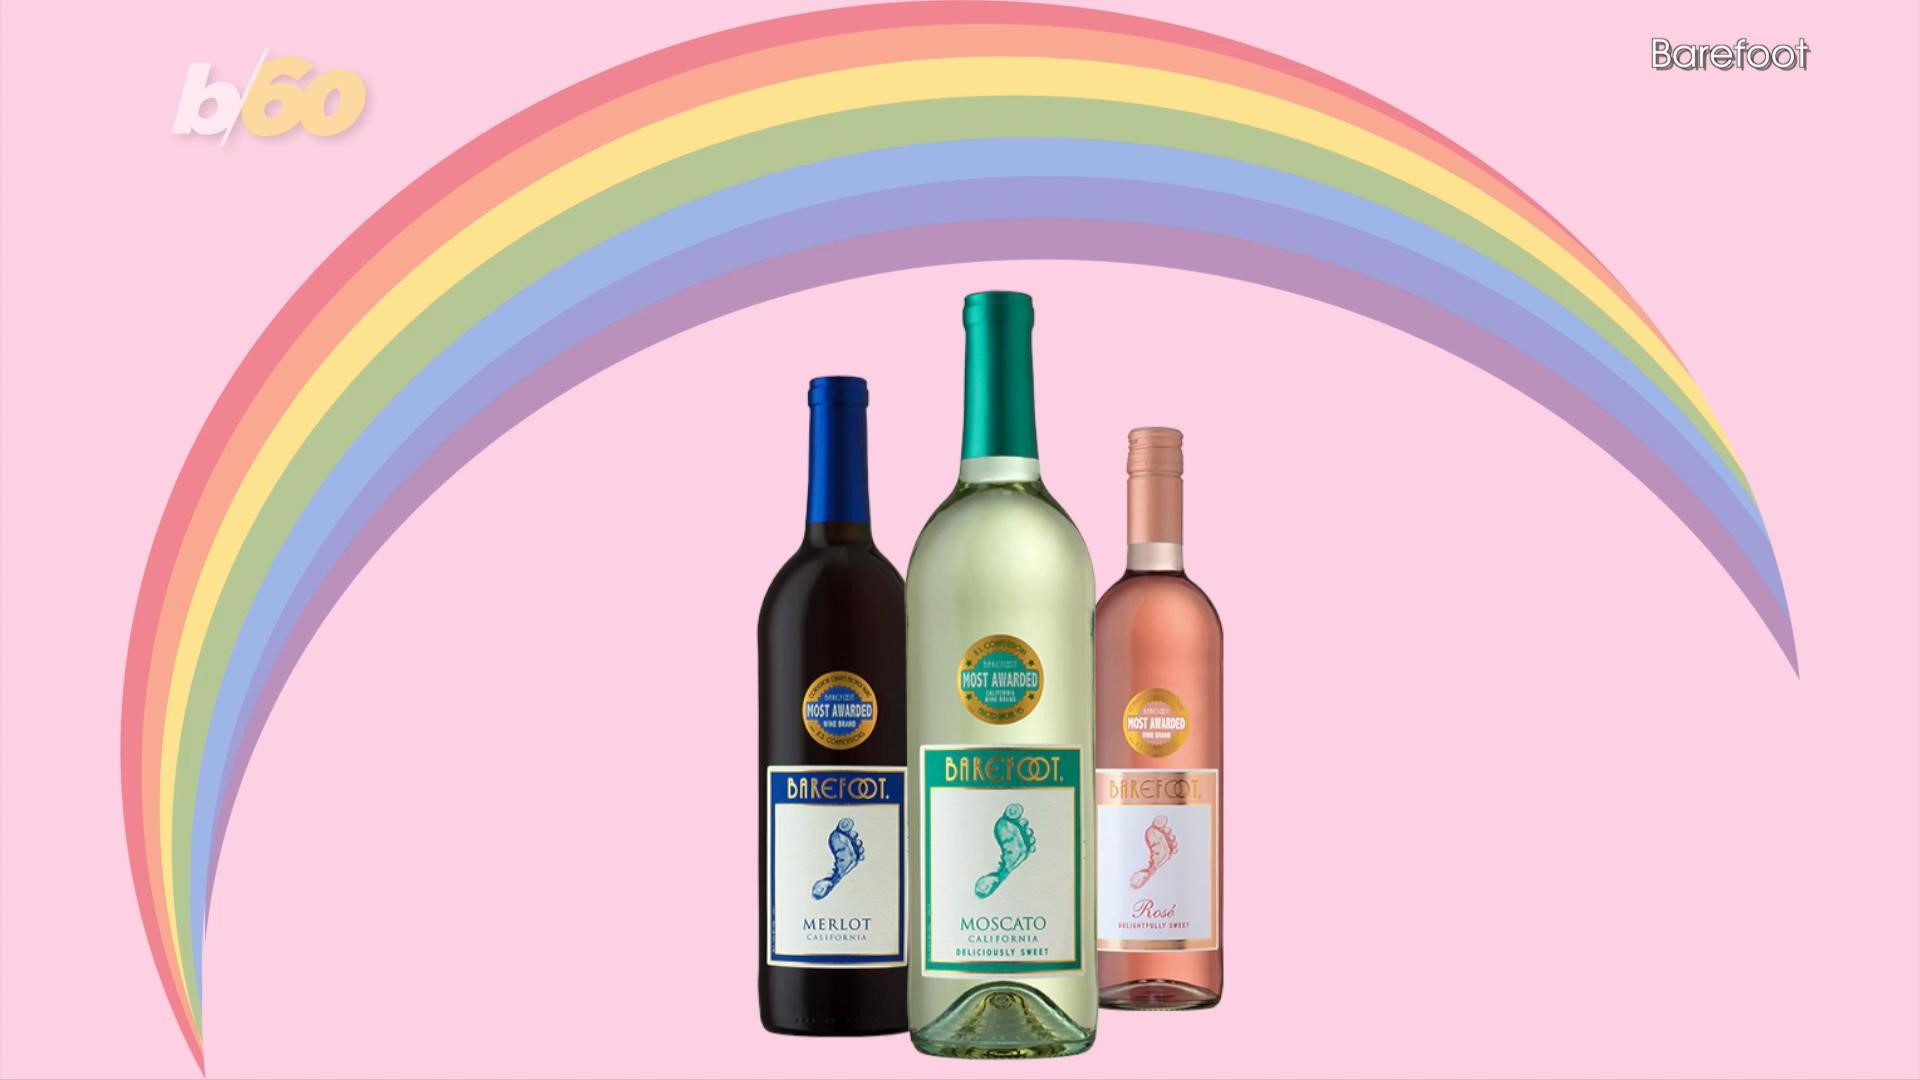 You can now celebrate pride month with your own customized wine bottle labels. Buzz60's Natasha Abellard (@NatashaAbellard) has the story.